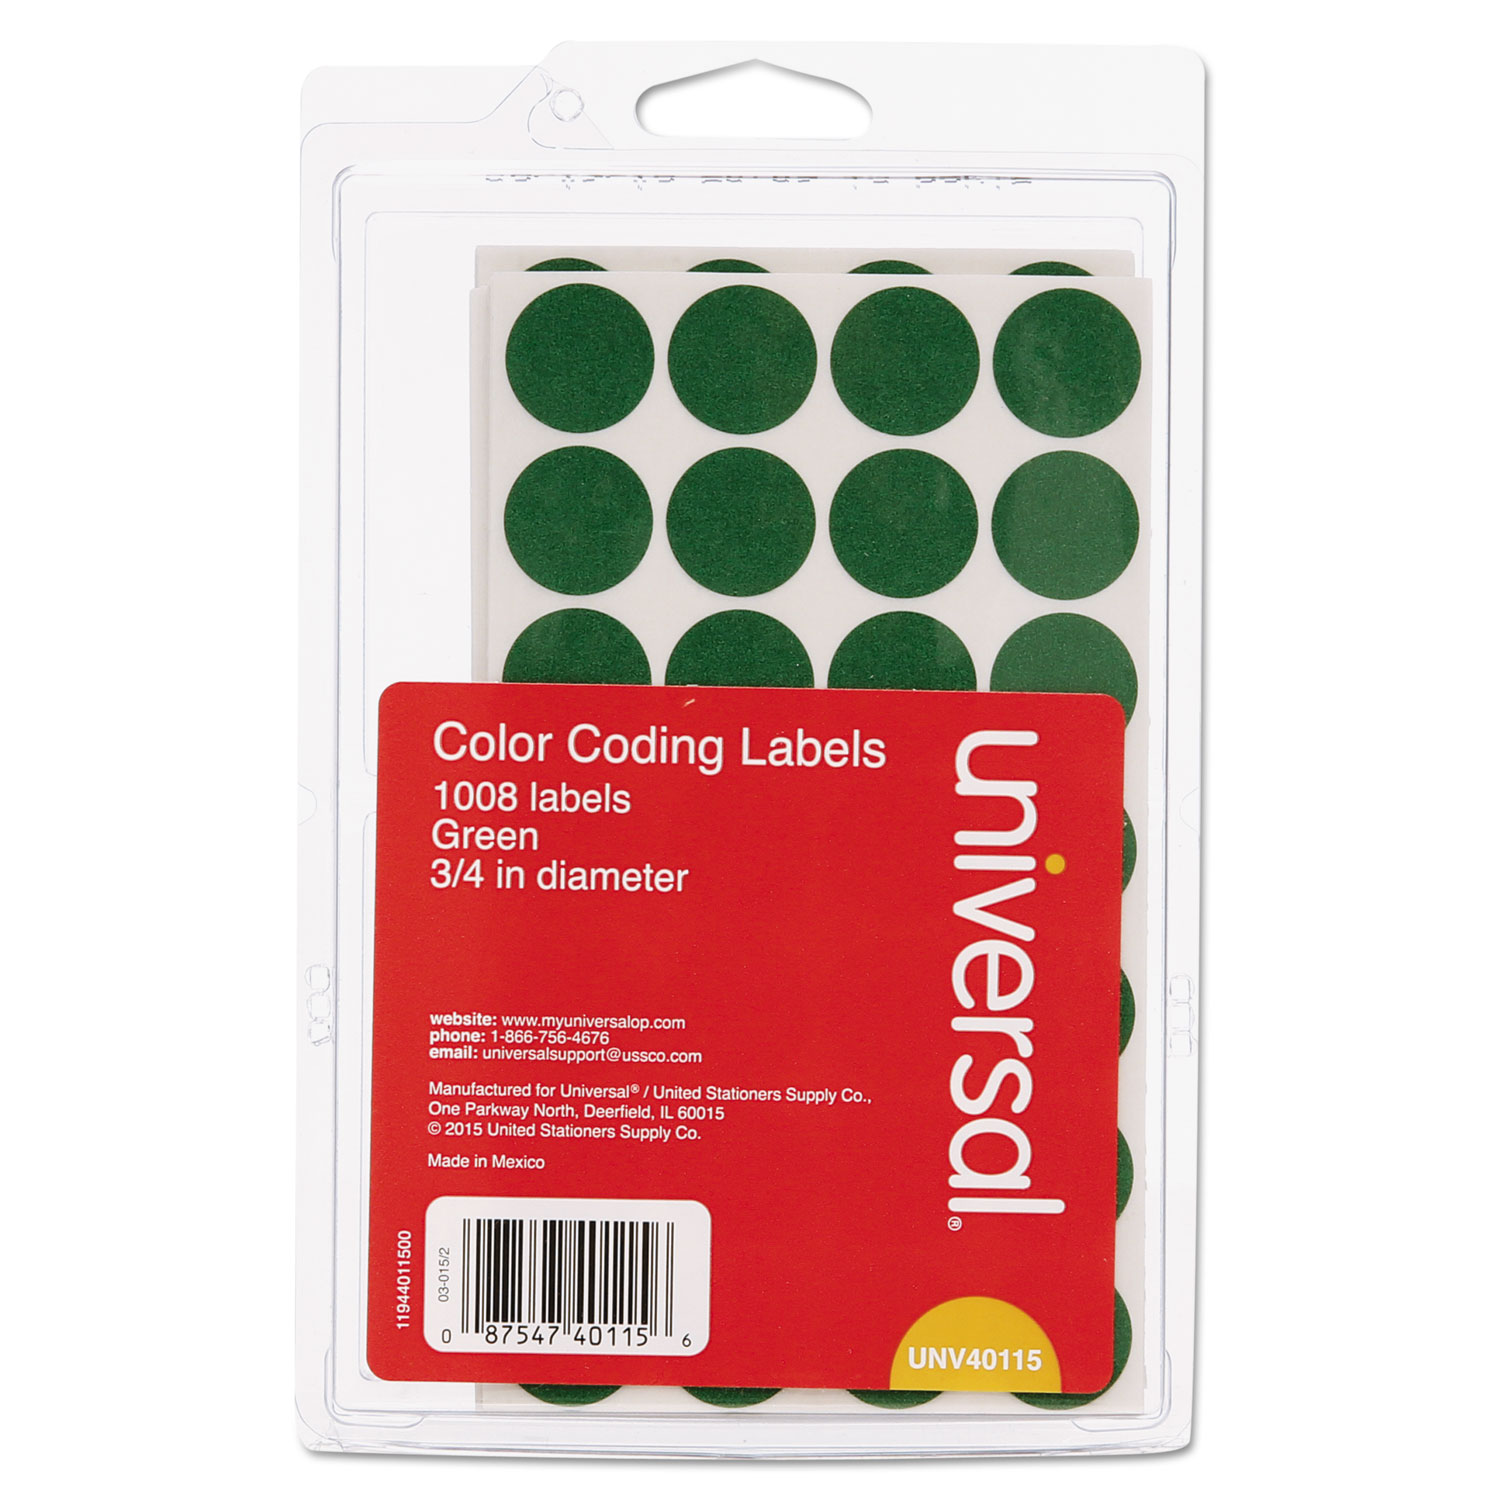  Universal UNV40115 Self-Adhesive Removable Color-Coding Labels, 0.75 dia., Green, 28/Sheet, 36 Sheets/Pack (UNV40115) 